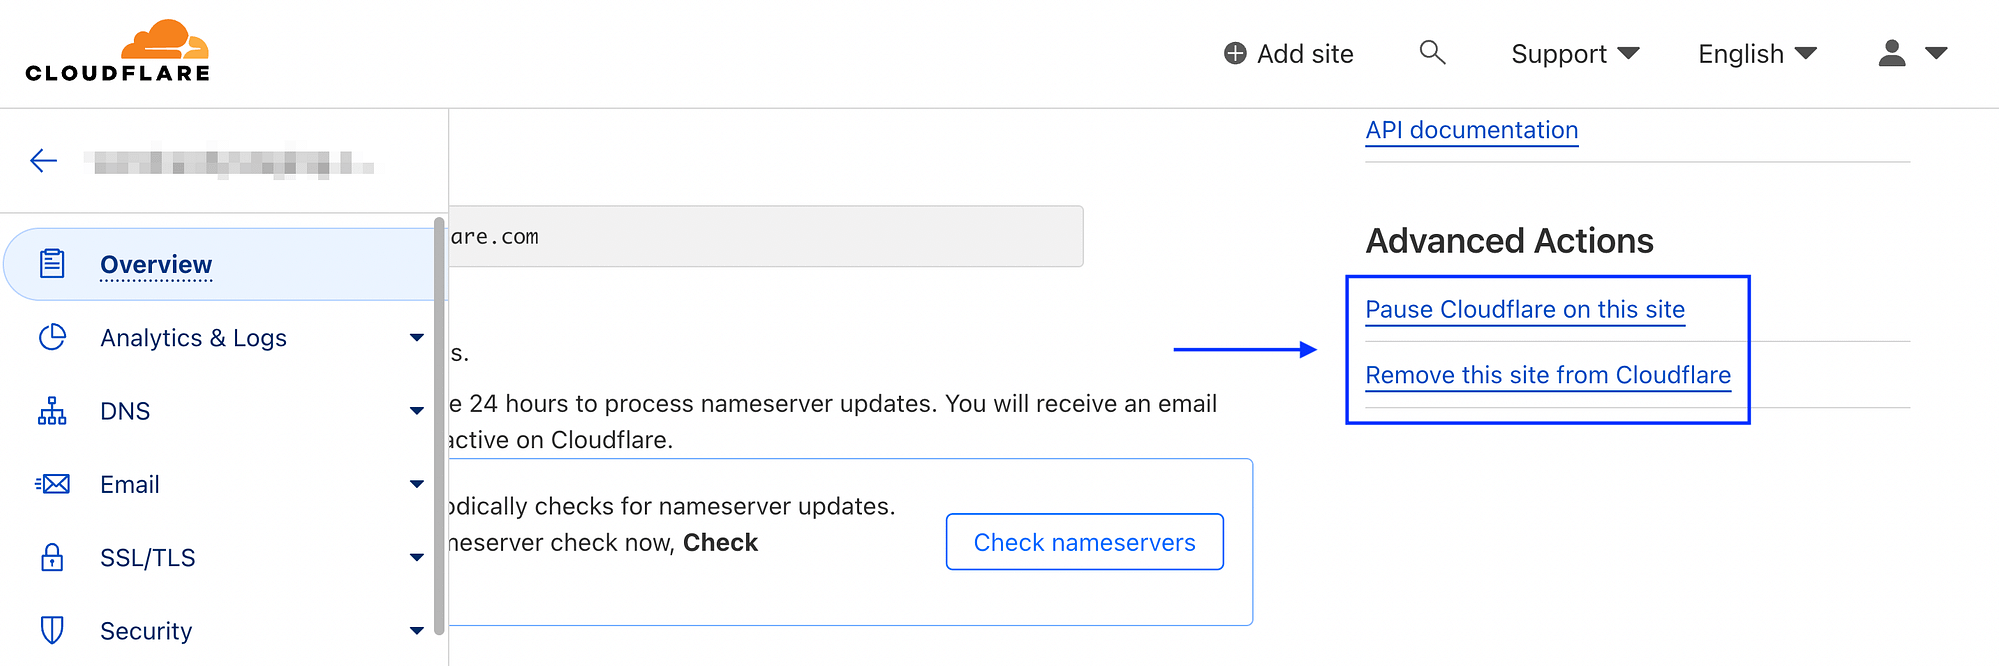 Cloudflare Advanced Actions give you the option to turn off the tool.